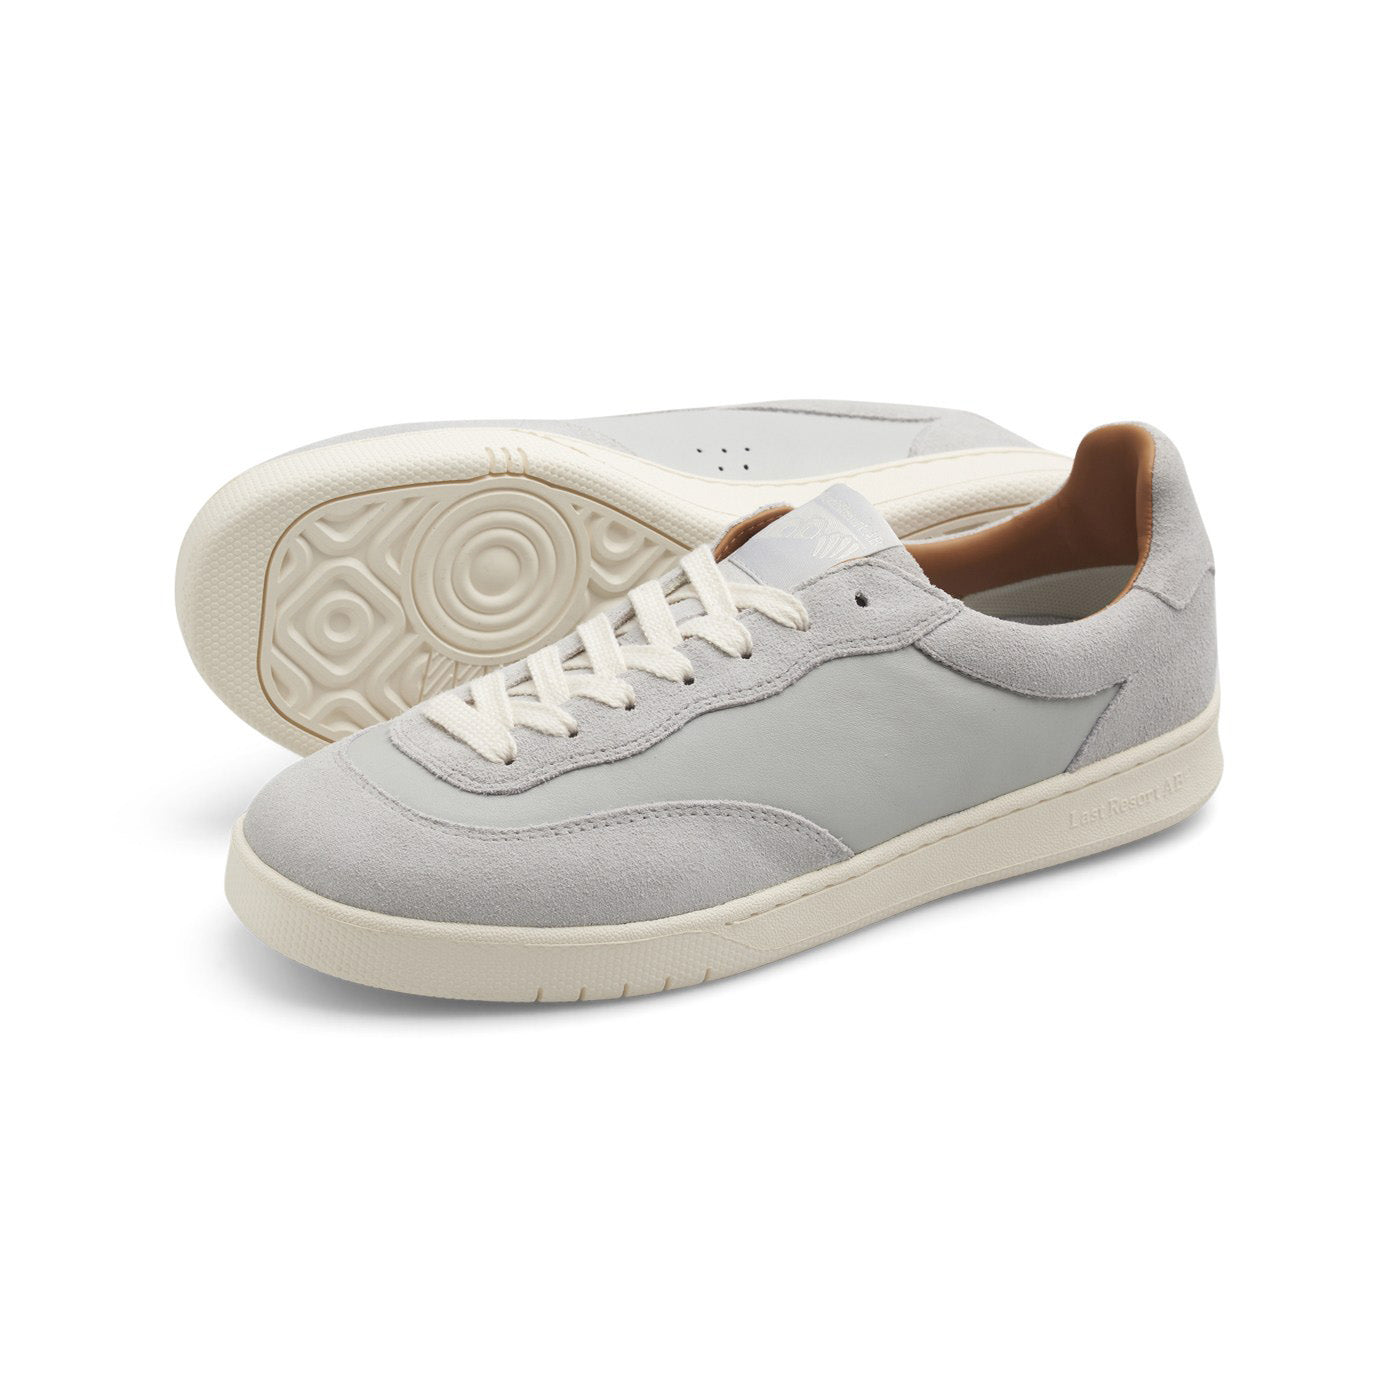 CM001 Lo Shoe Suede / Leather, Lt Grey / White